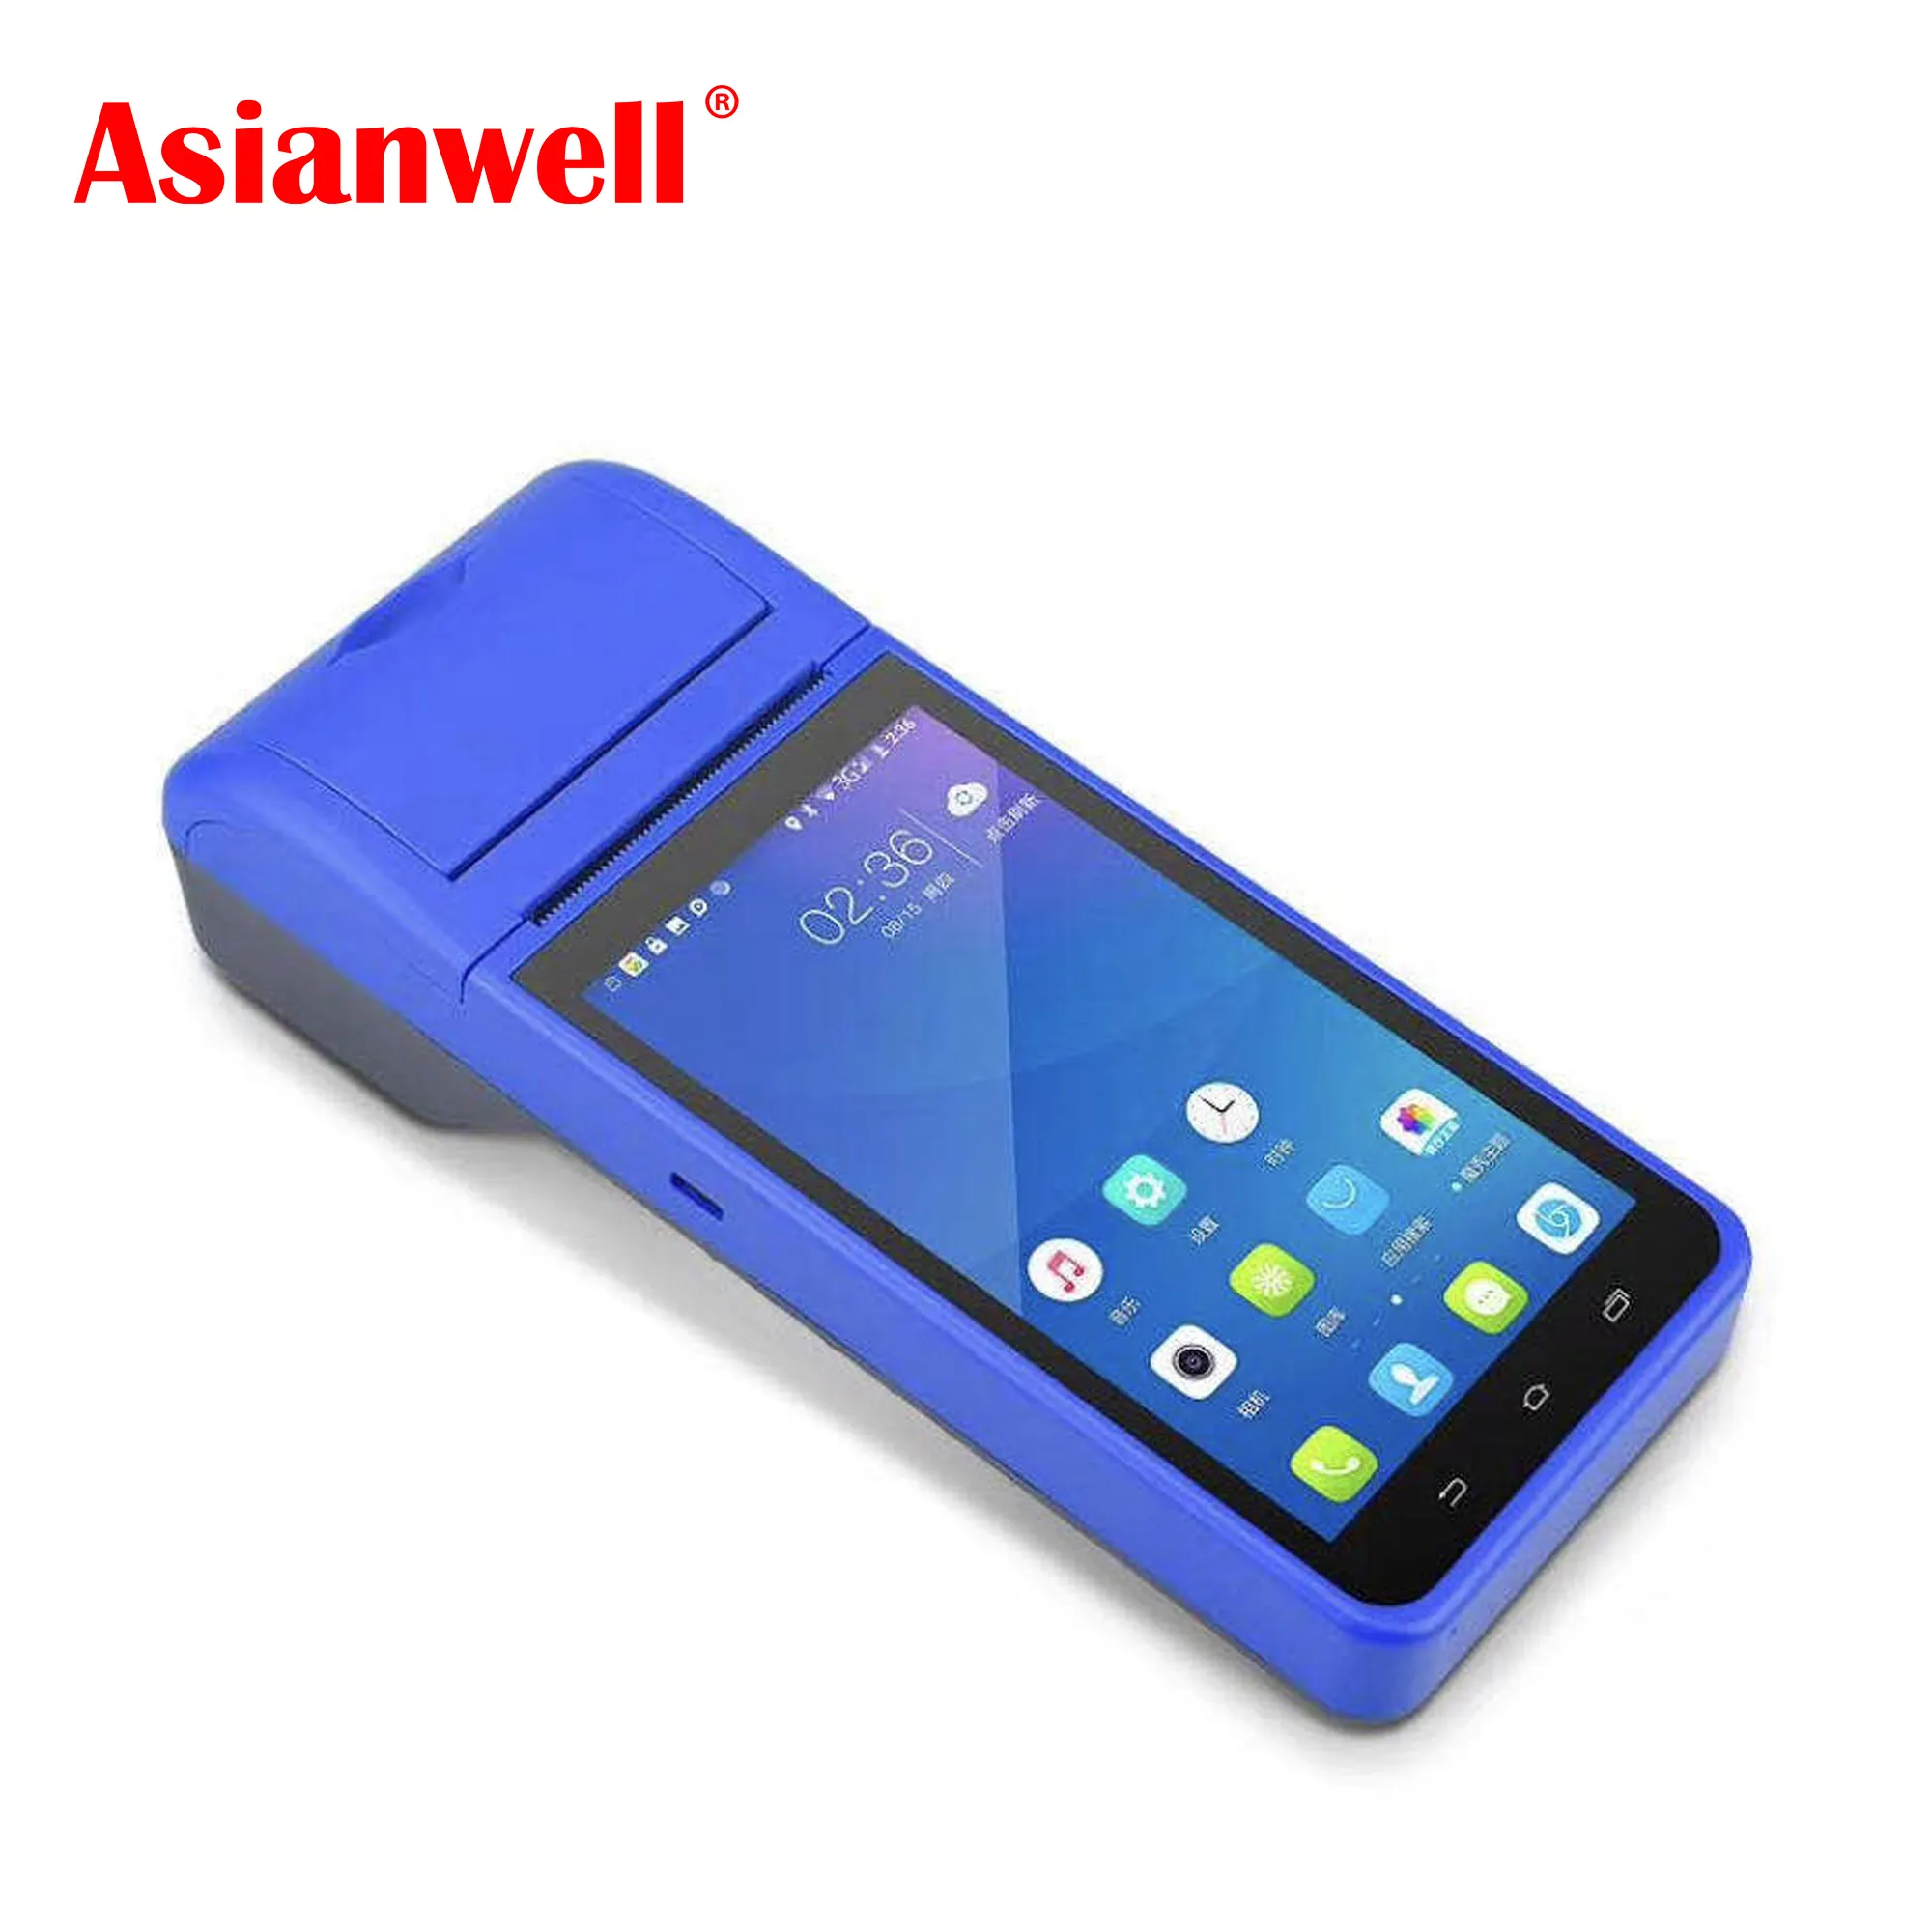 AW-P3 OEM Smart Mini Handheld Industrie Android OS WiFi 2G 3G Pos PDA mit Bulid-In Drucker Android OS System PDA